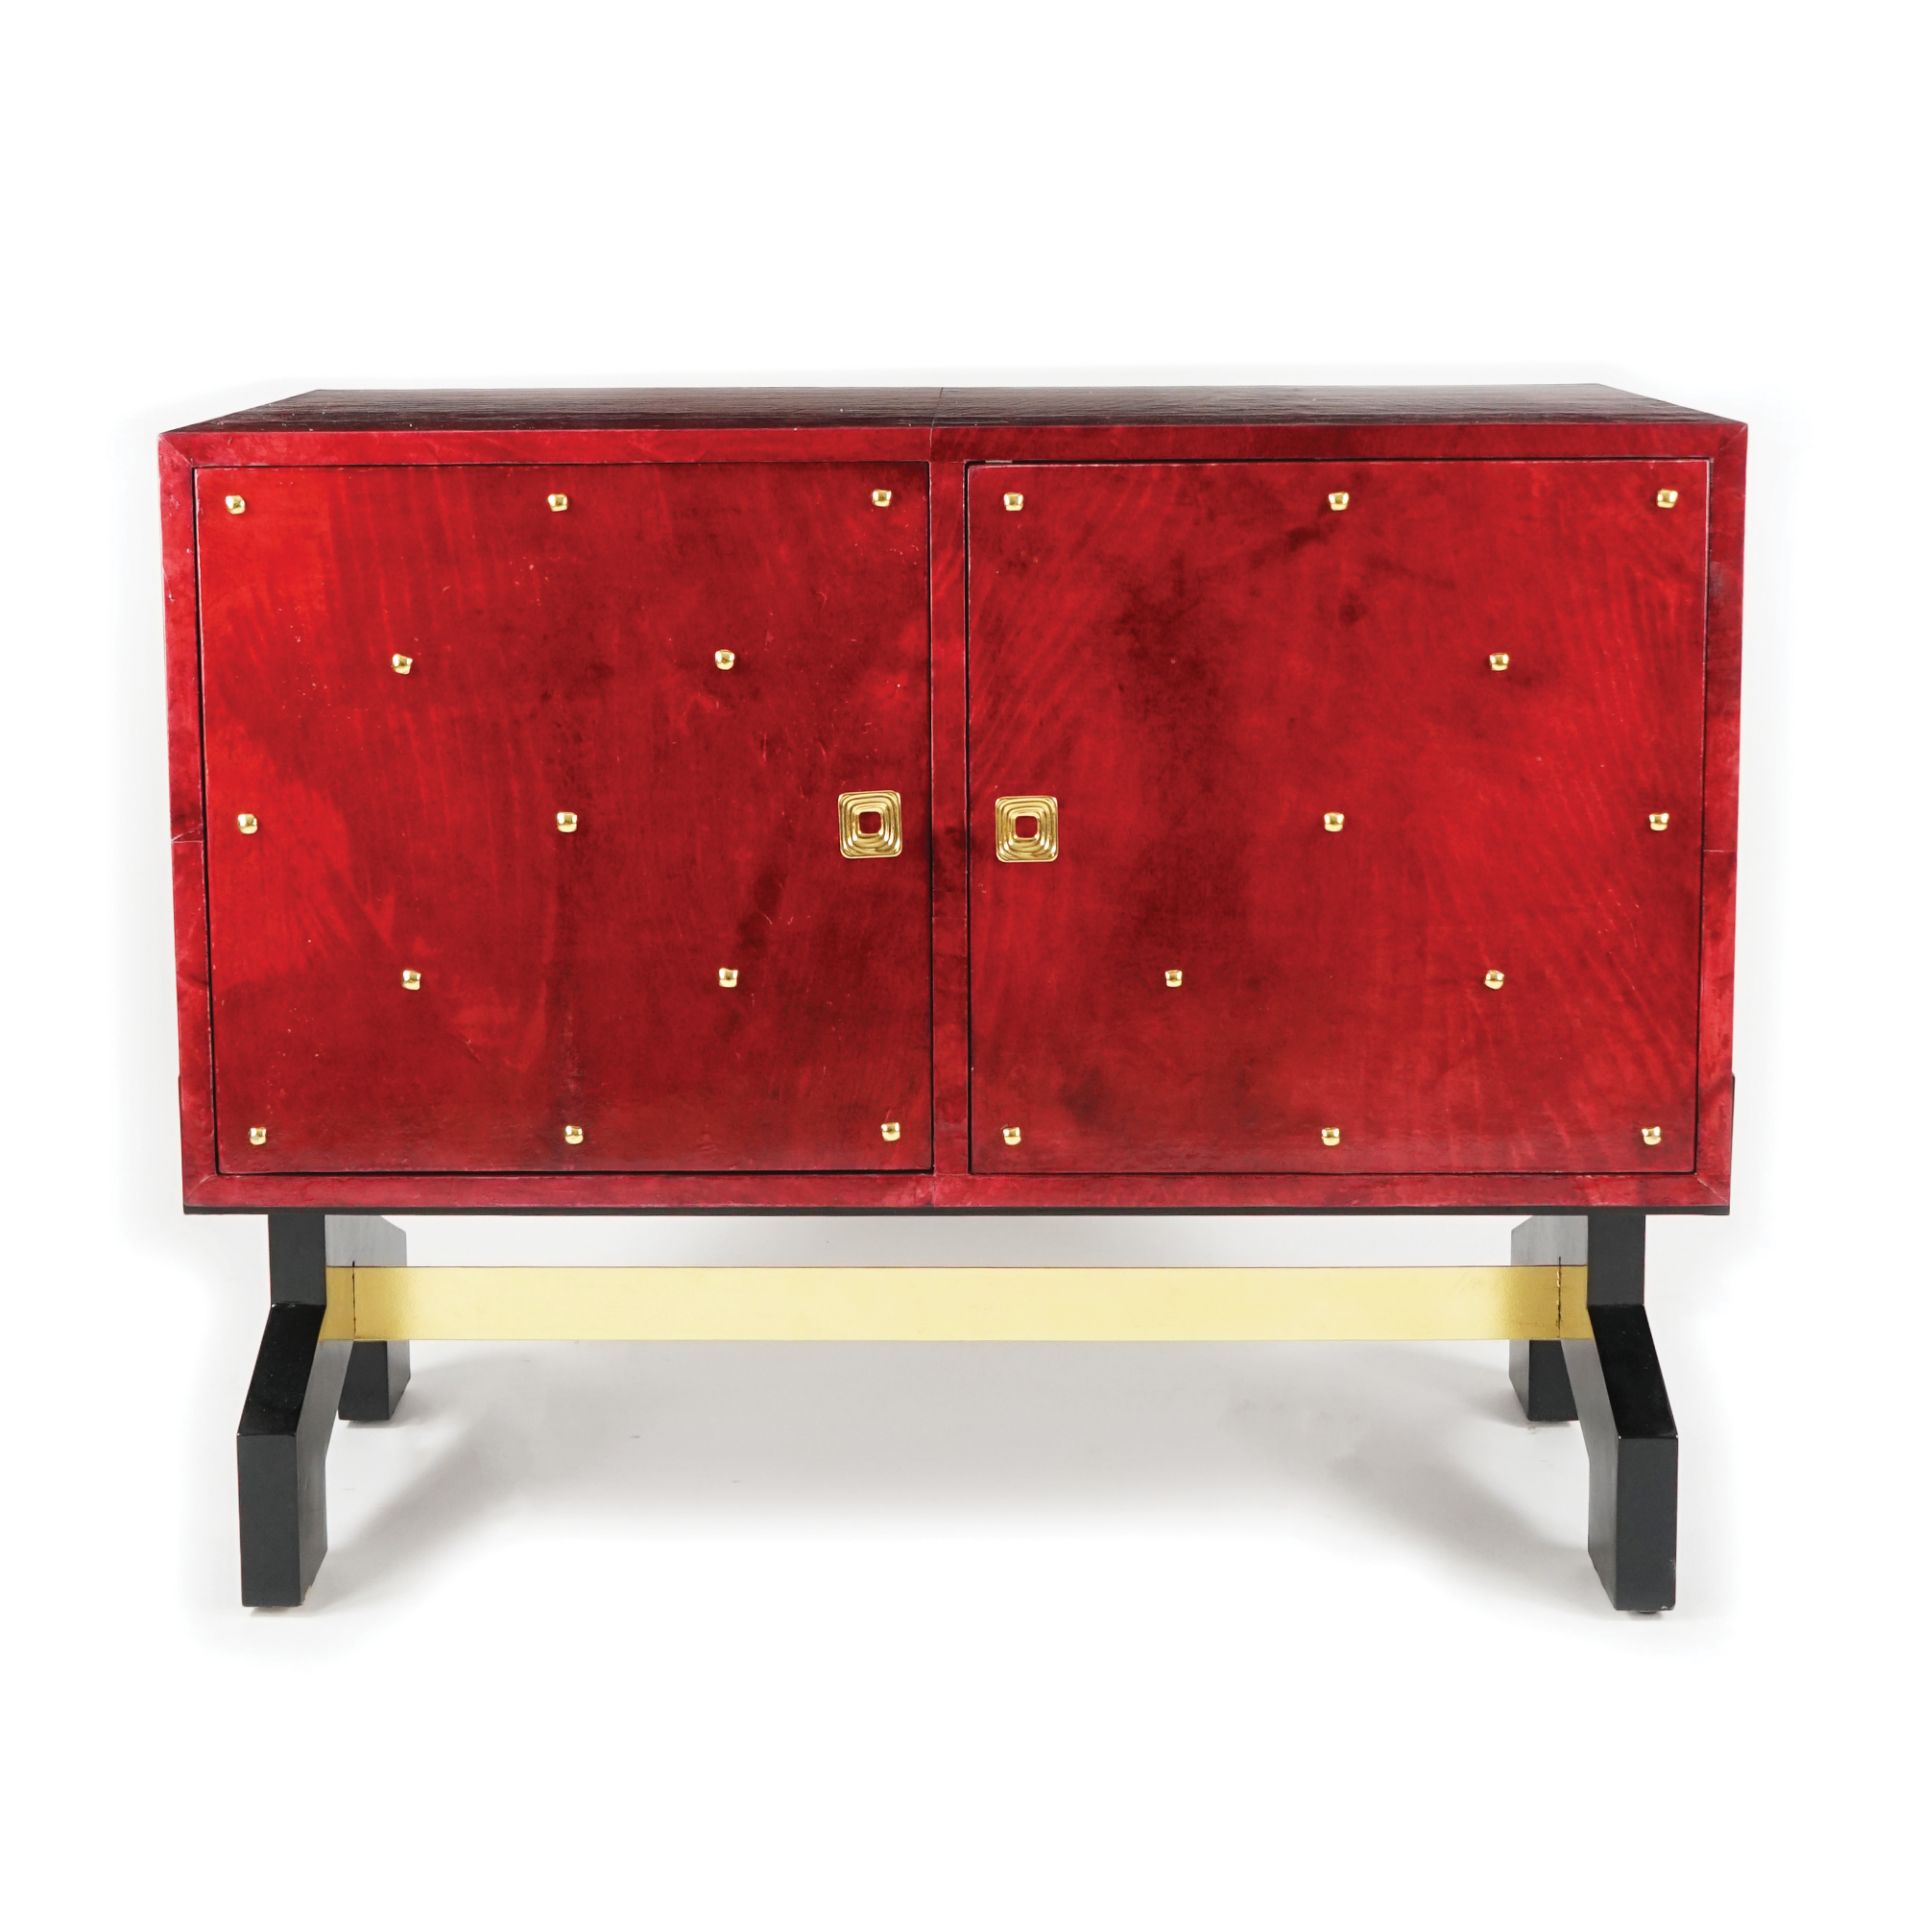 A red painted and lacquered parchment coated wood sideboard